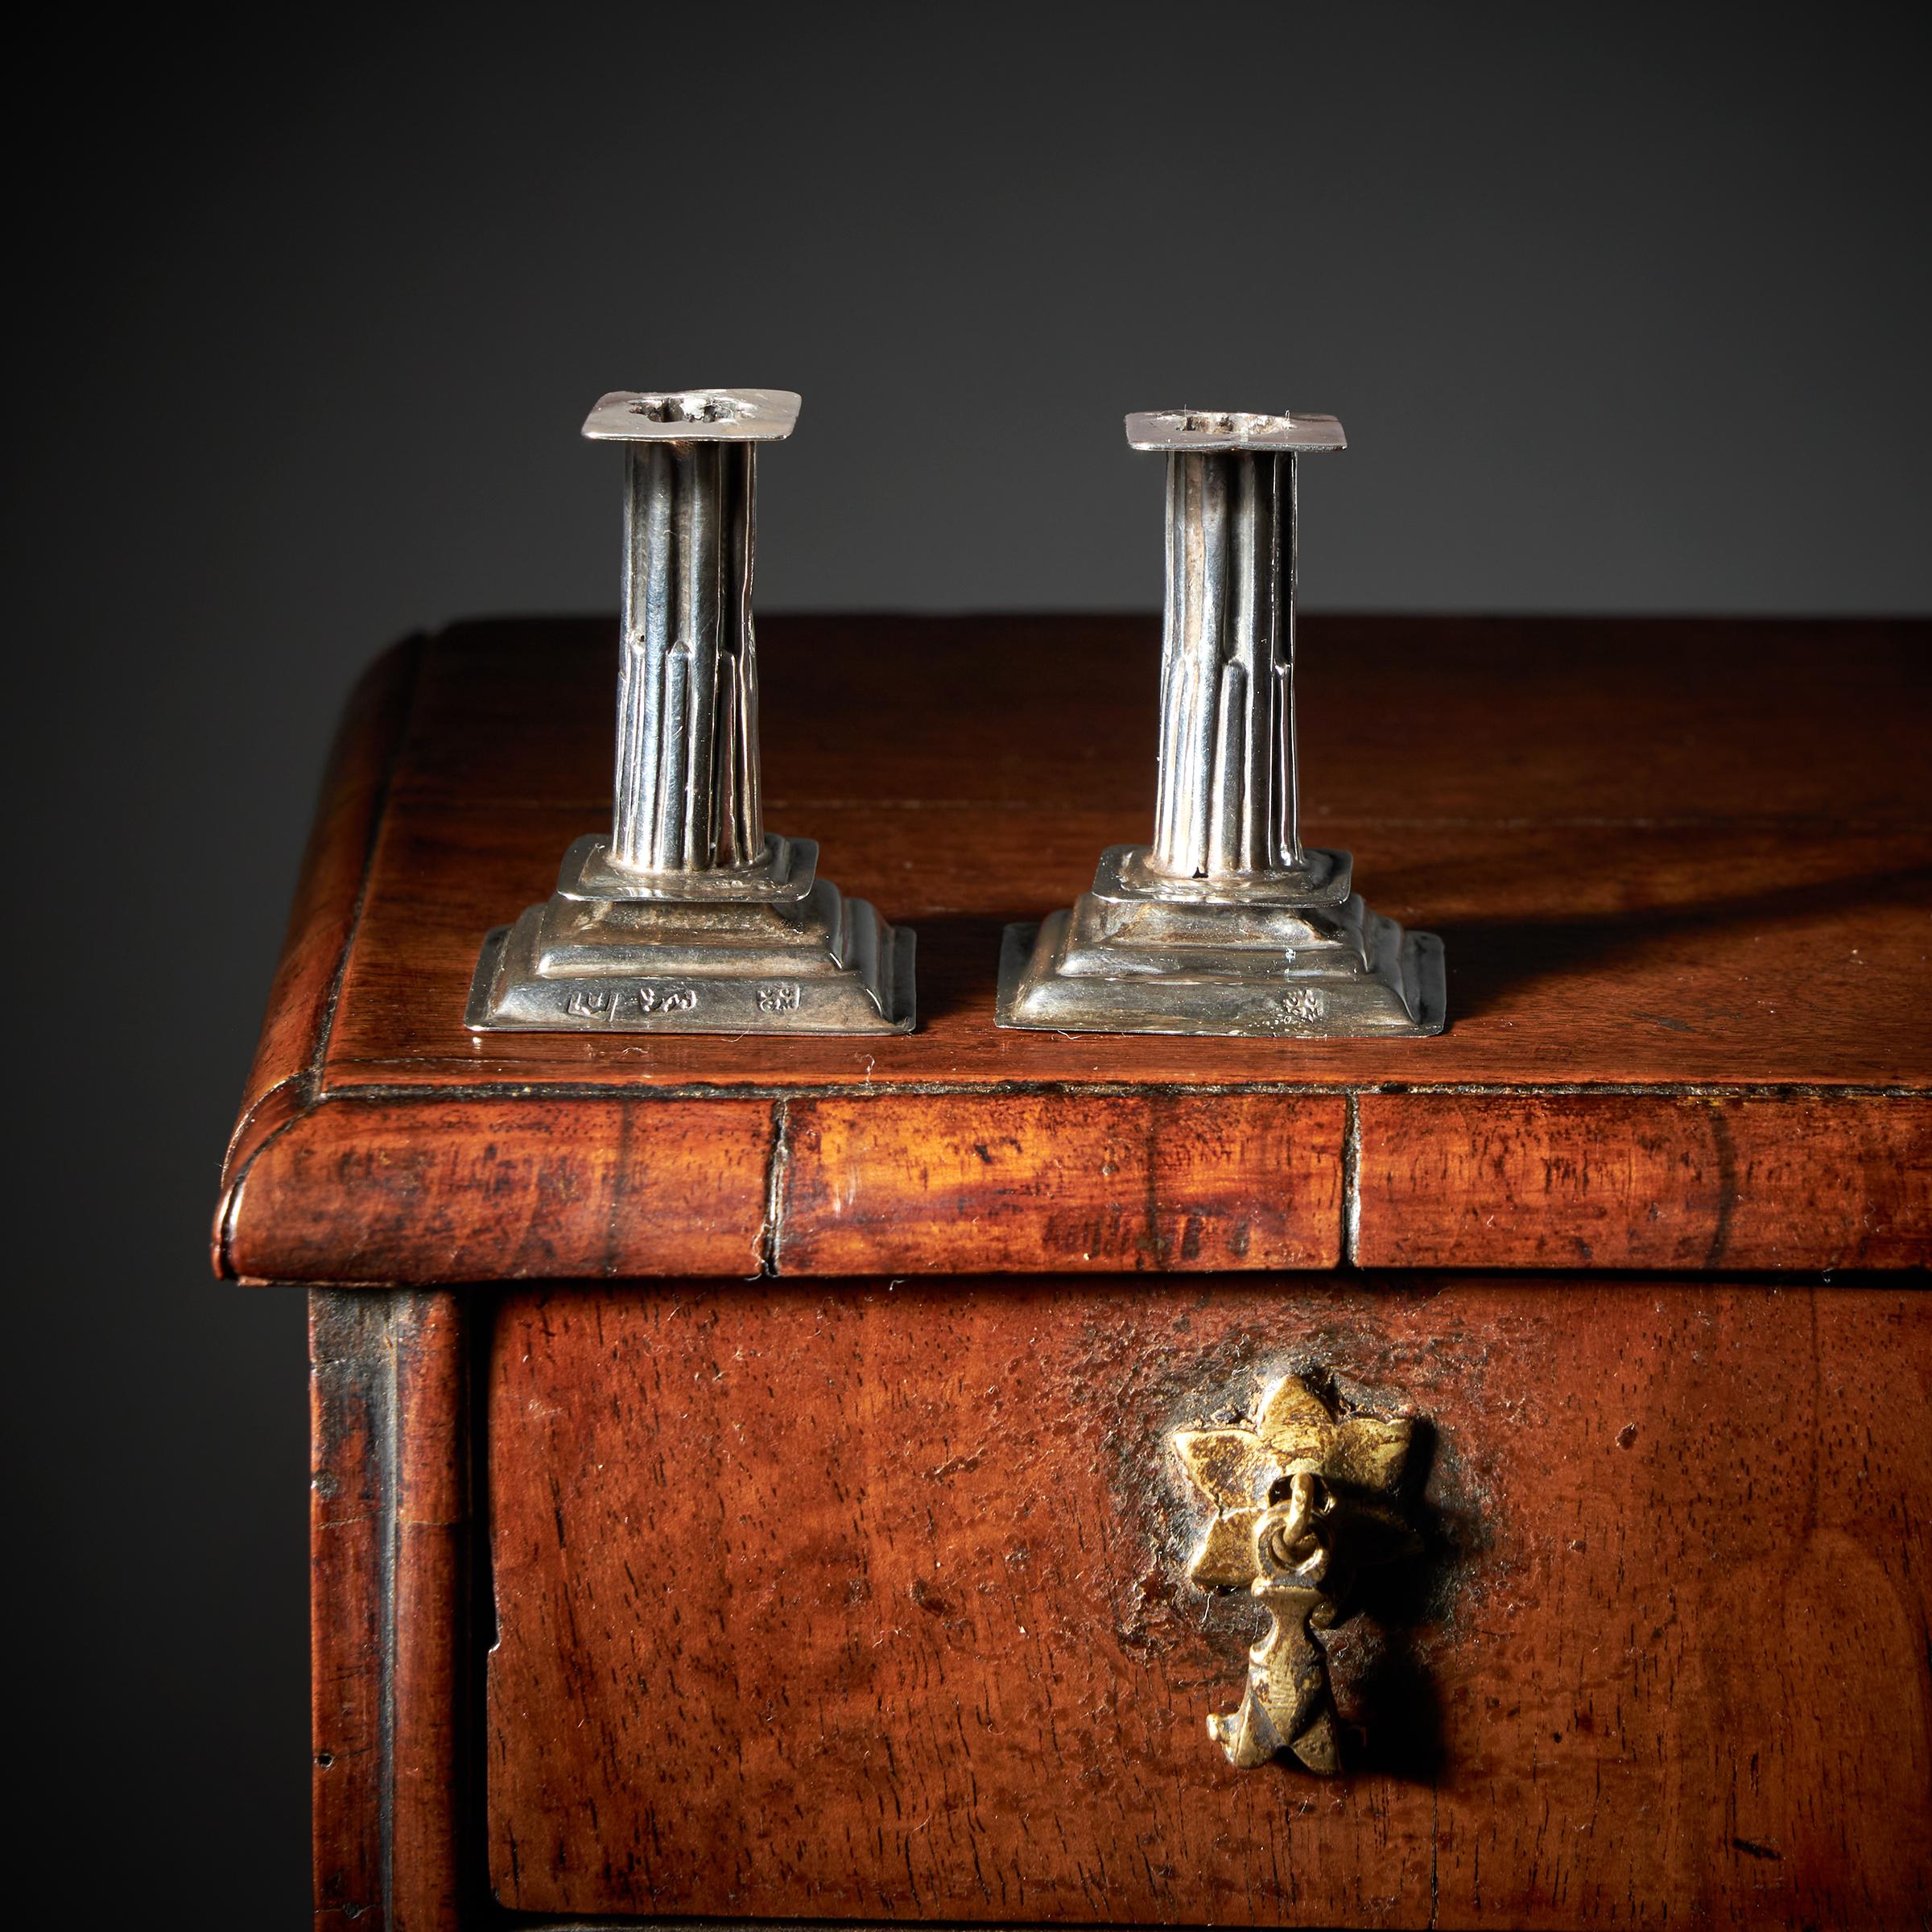 A Pair of 17th Century William and Mary Miniature Candlesticks By George Manjoy For Sale 1